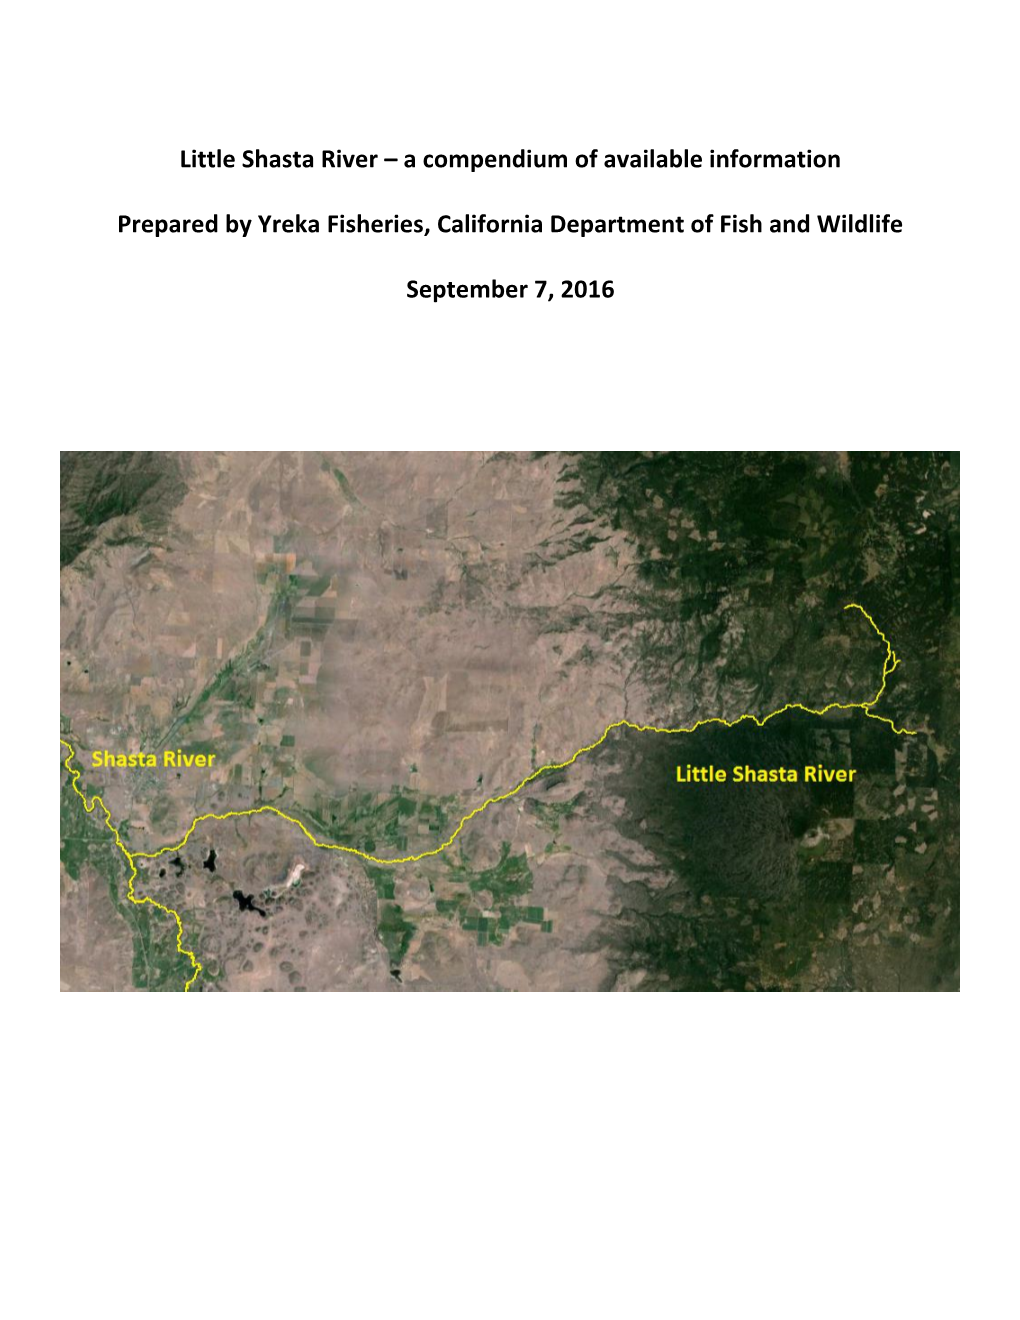 Little Shasta River – a Compendium of Available Information